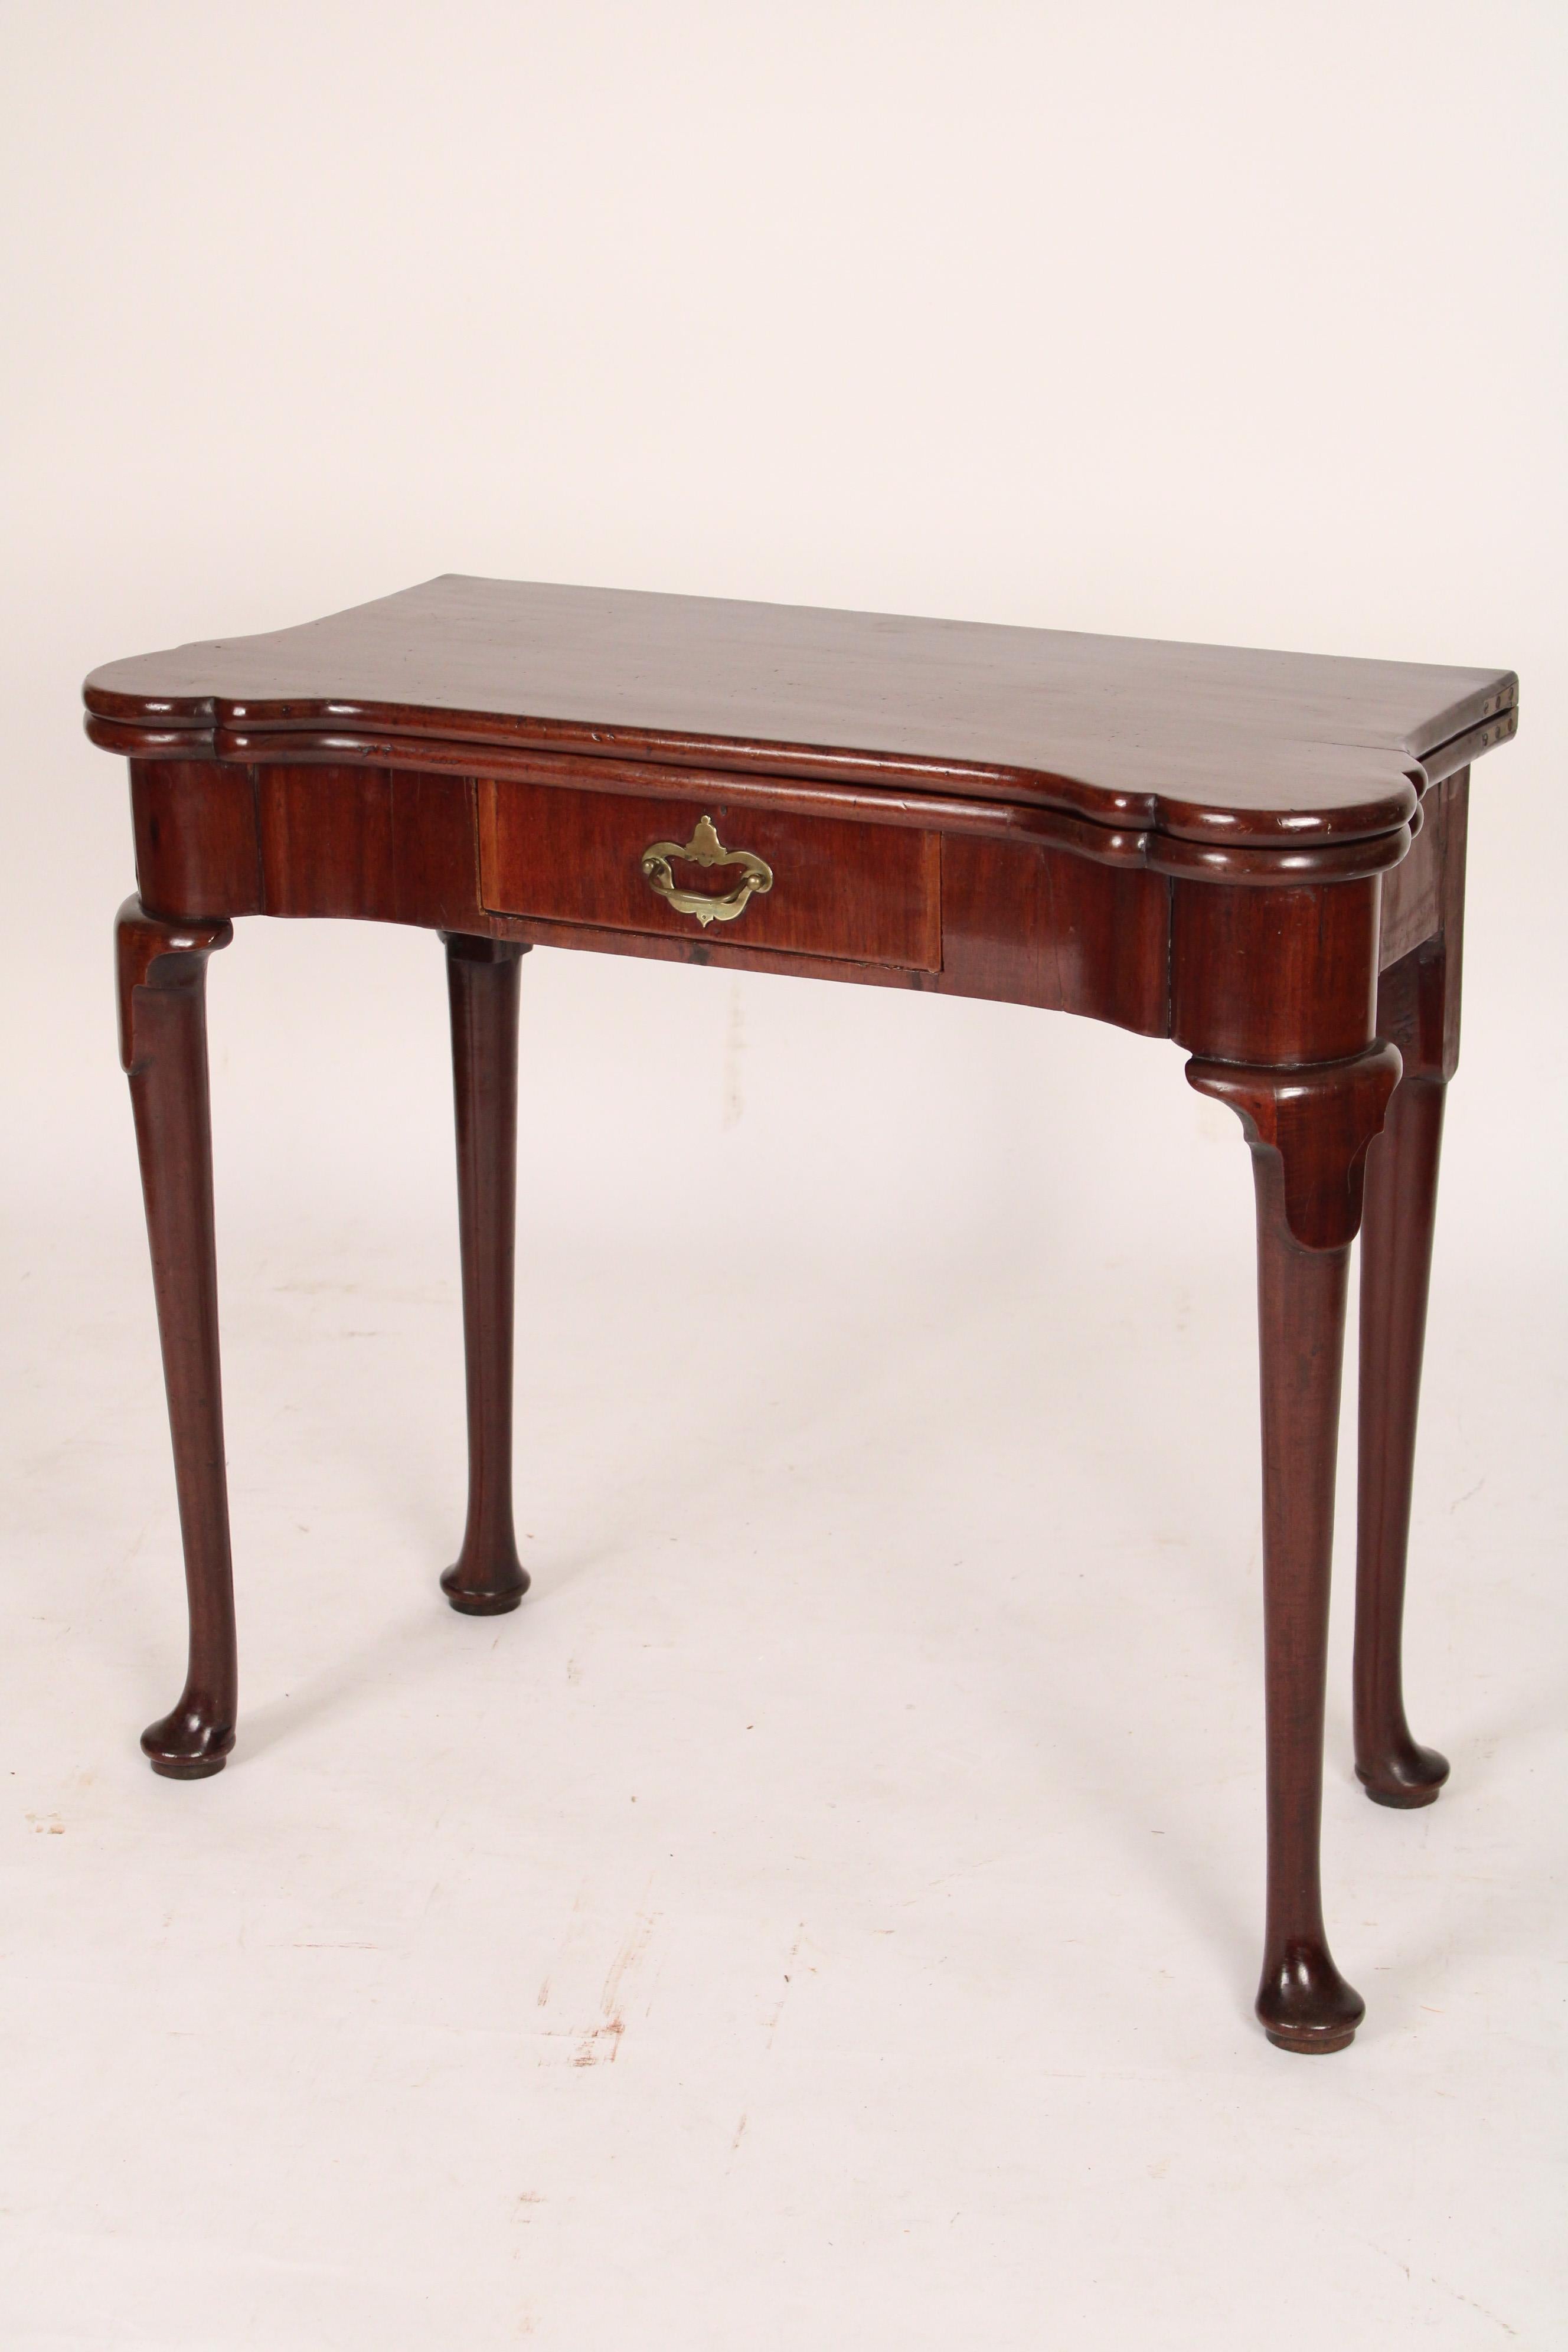 George I mahogany games table, 18th century. With a rectangular over hanging top with turret corners, a frieze drawer, cabriole legs ending in pad feet. The back left leg swings out to support the top when the top is opened.